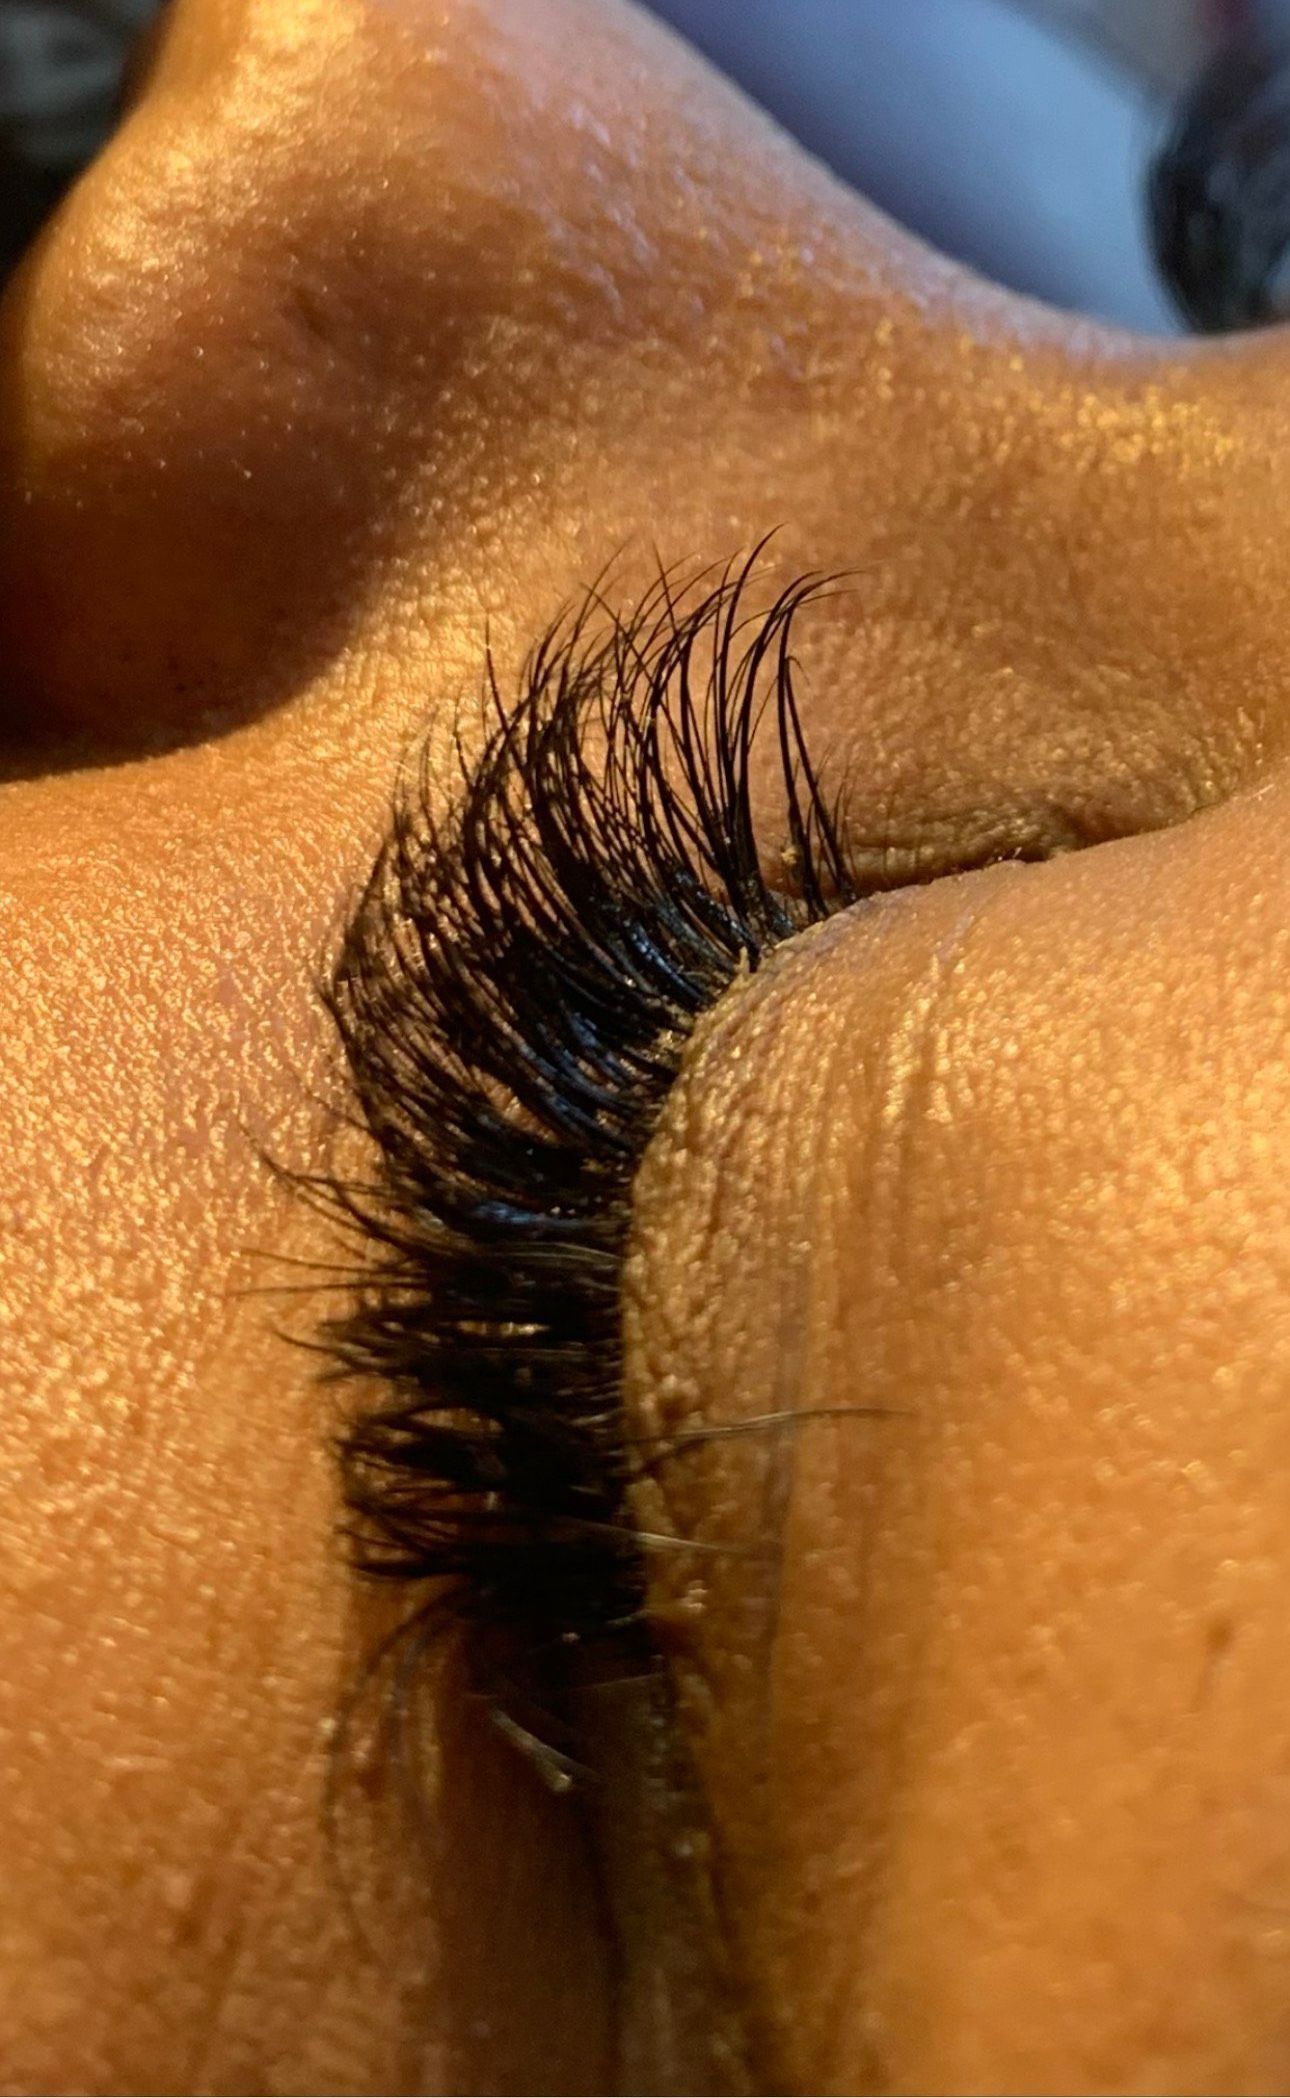 A close up of a person 's eye with long eyelashes.| St. Louis, MO | Lashing Out Loud